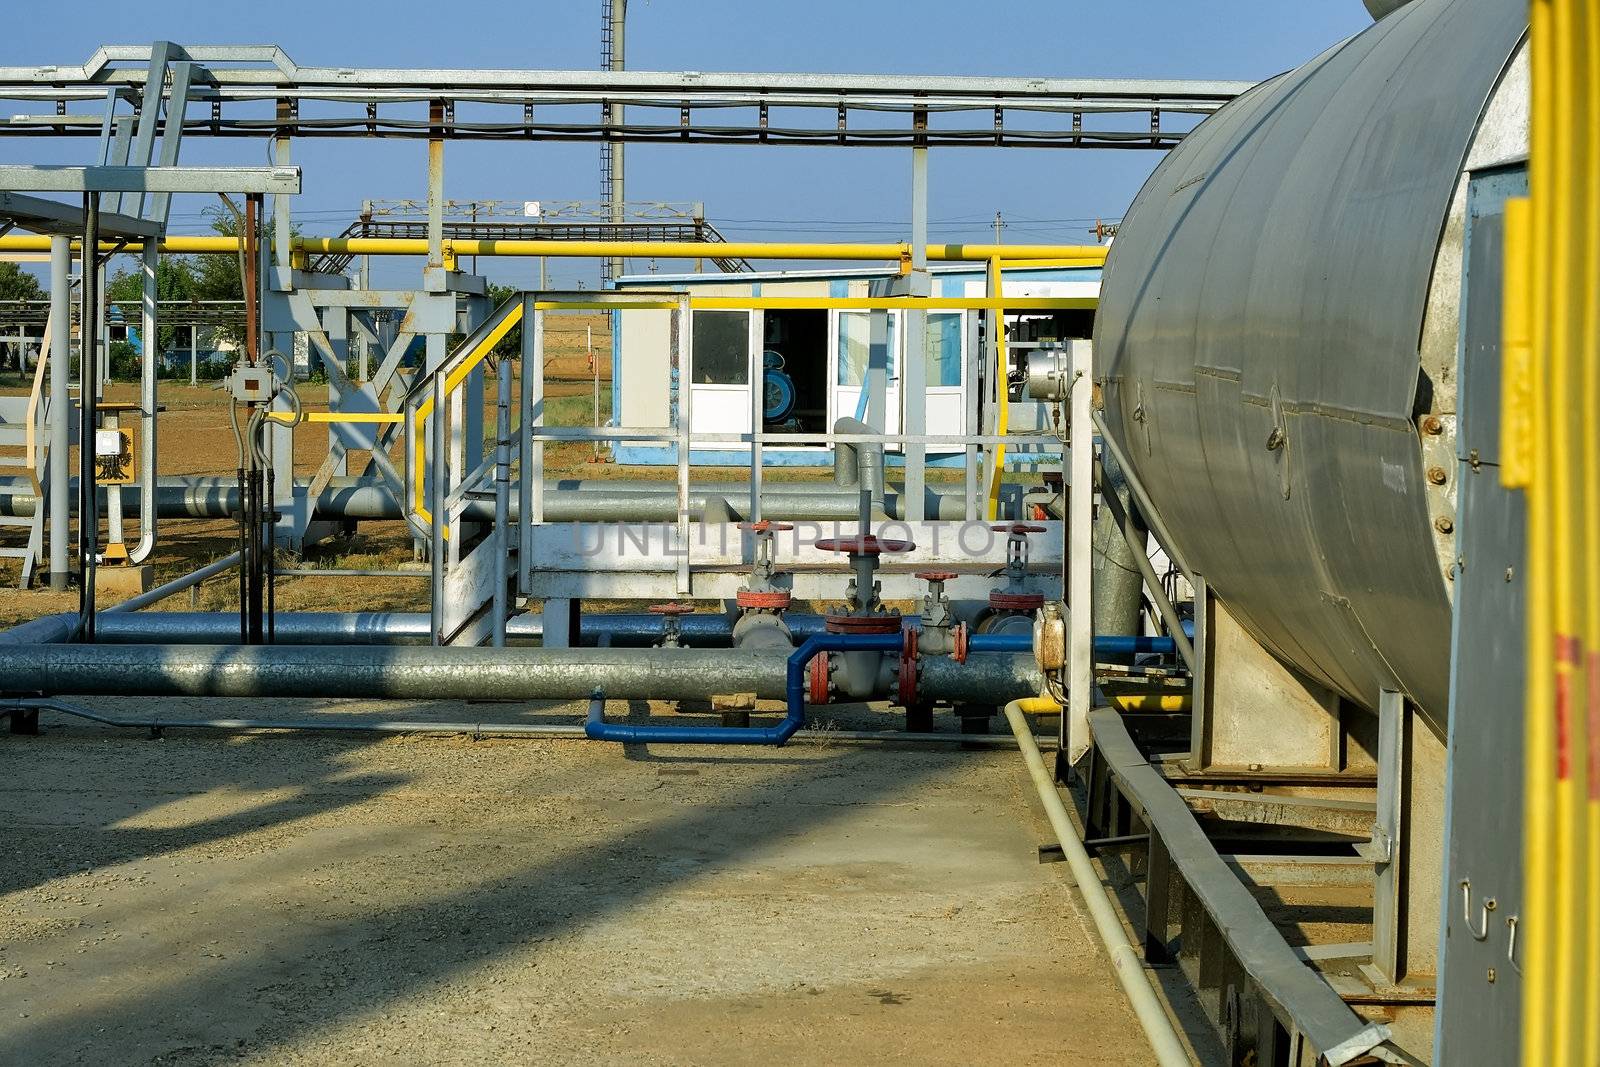 Technological building in pumps for pumping oil.